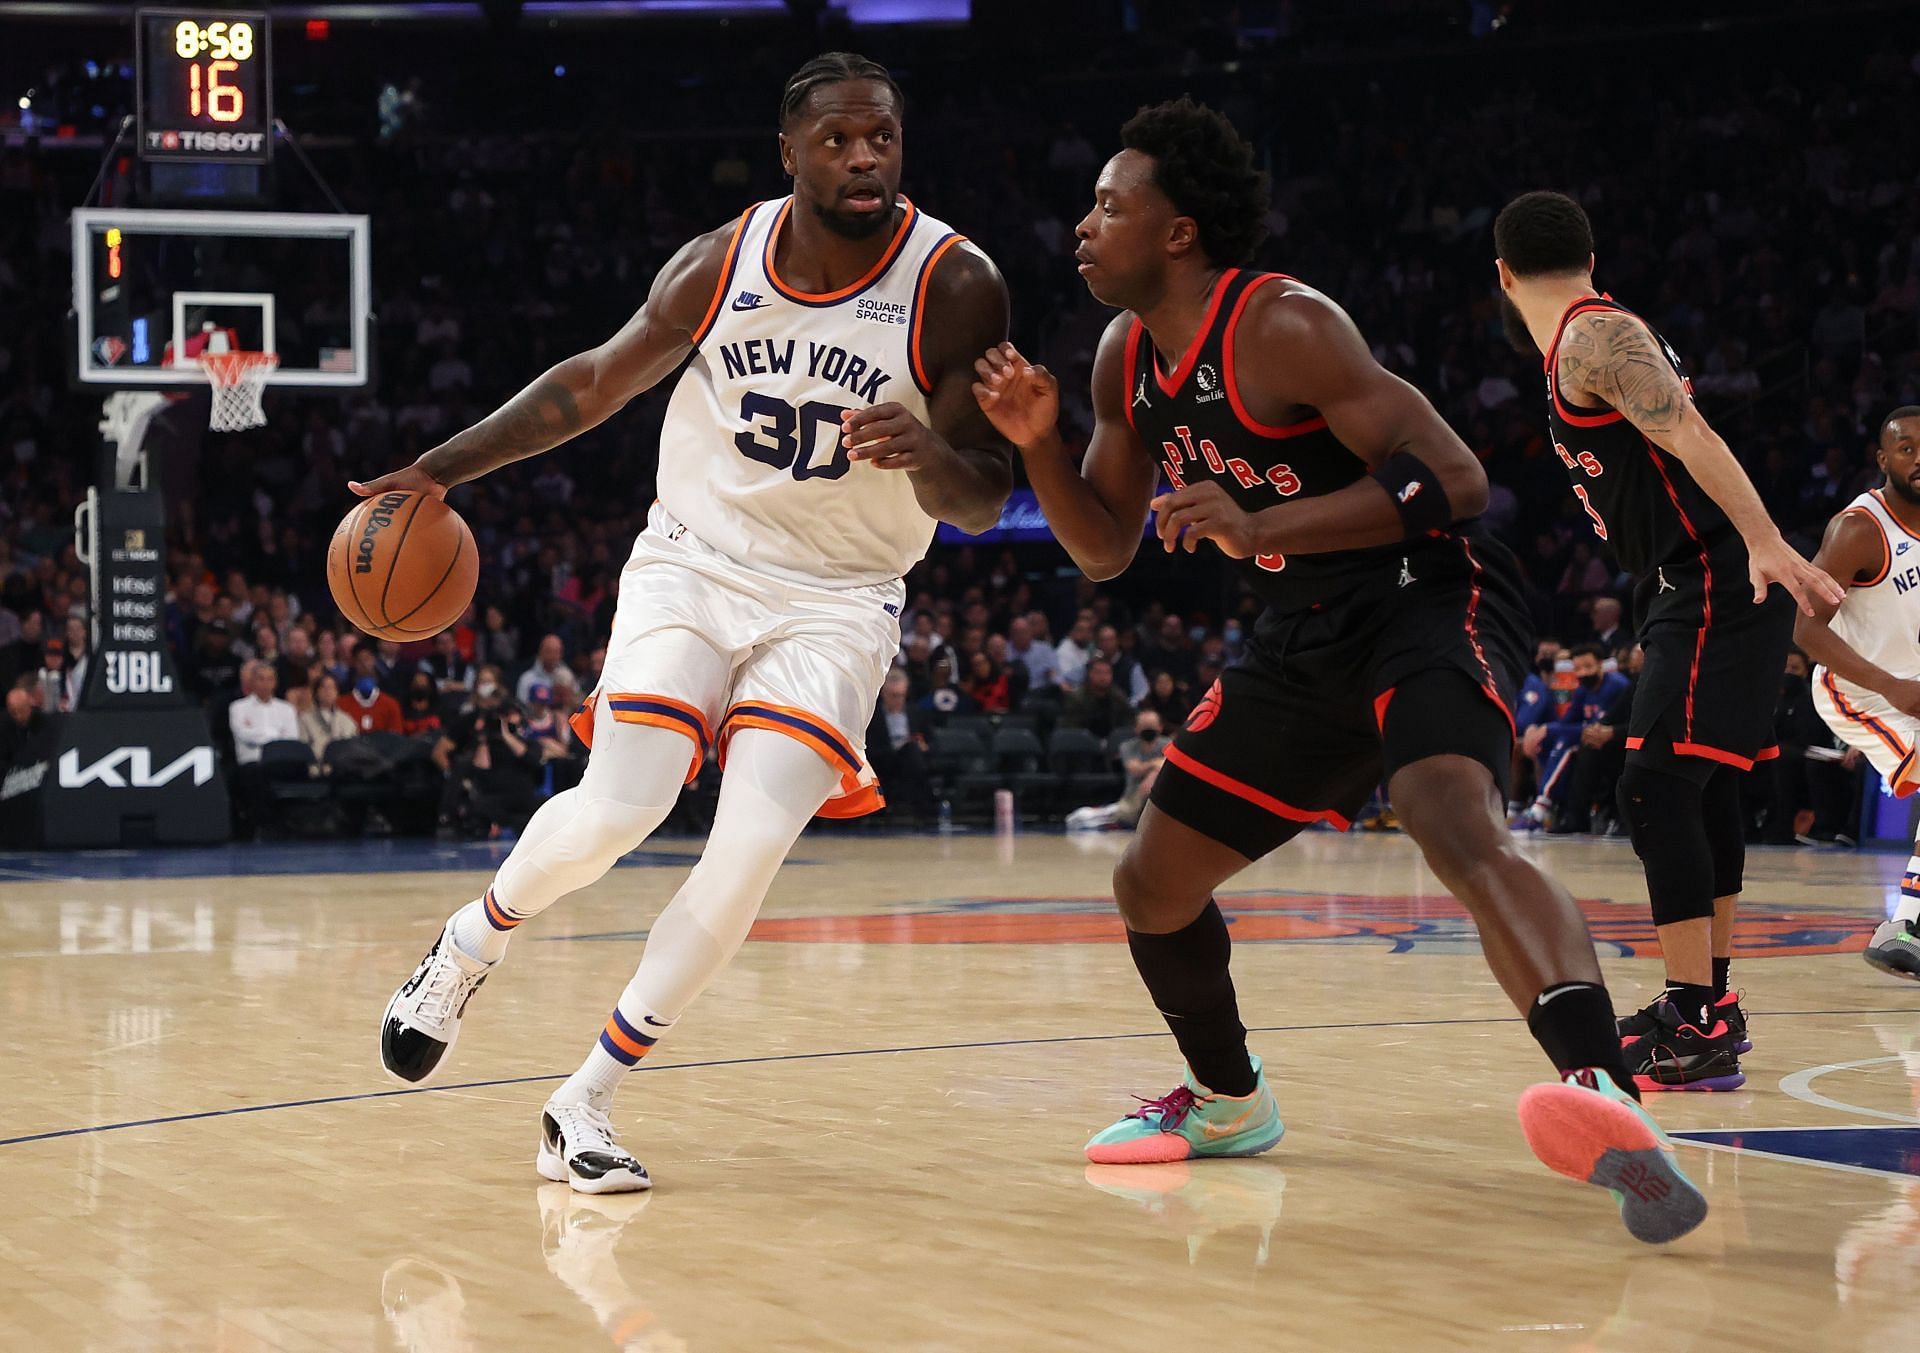 New York Knicks star power forward Julius Randle with the ball during a game